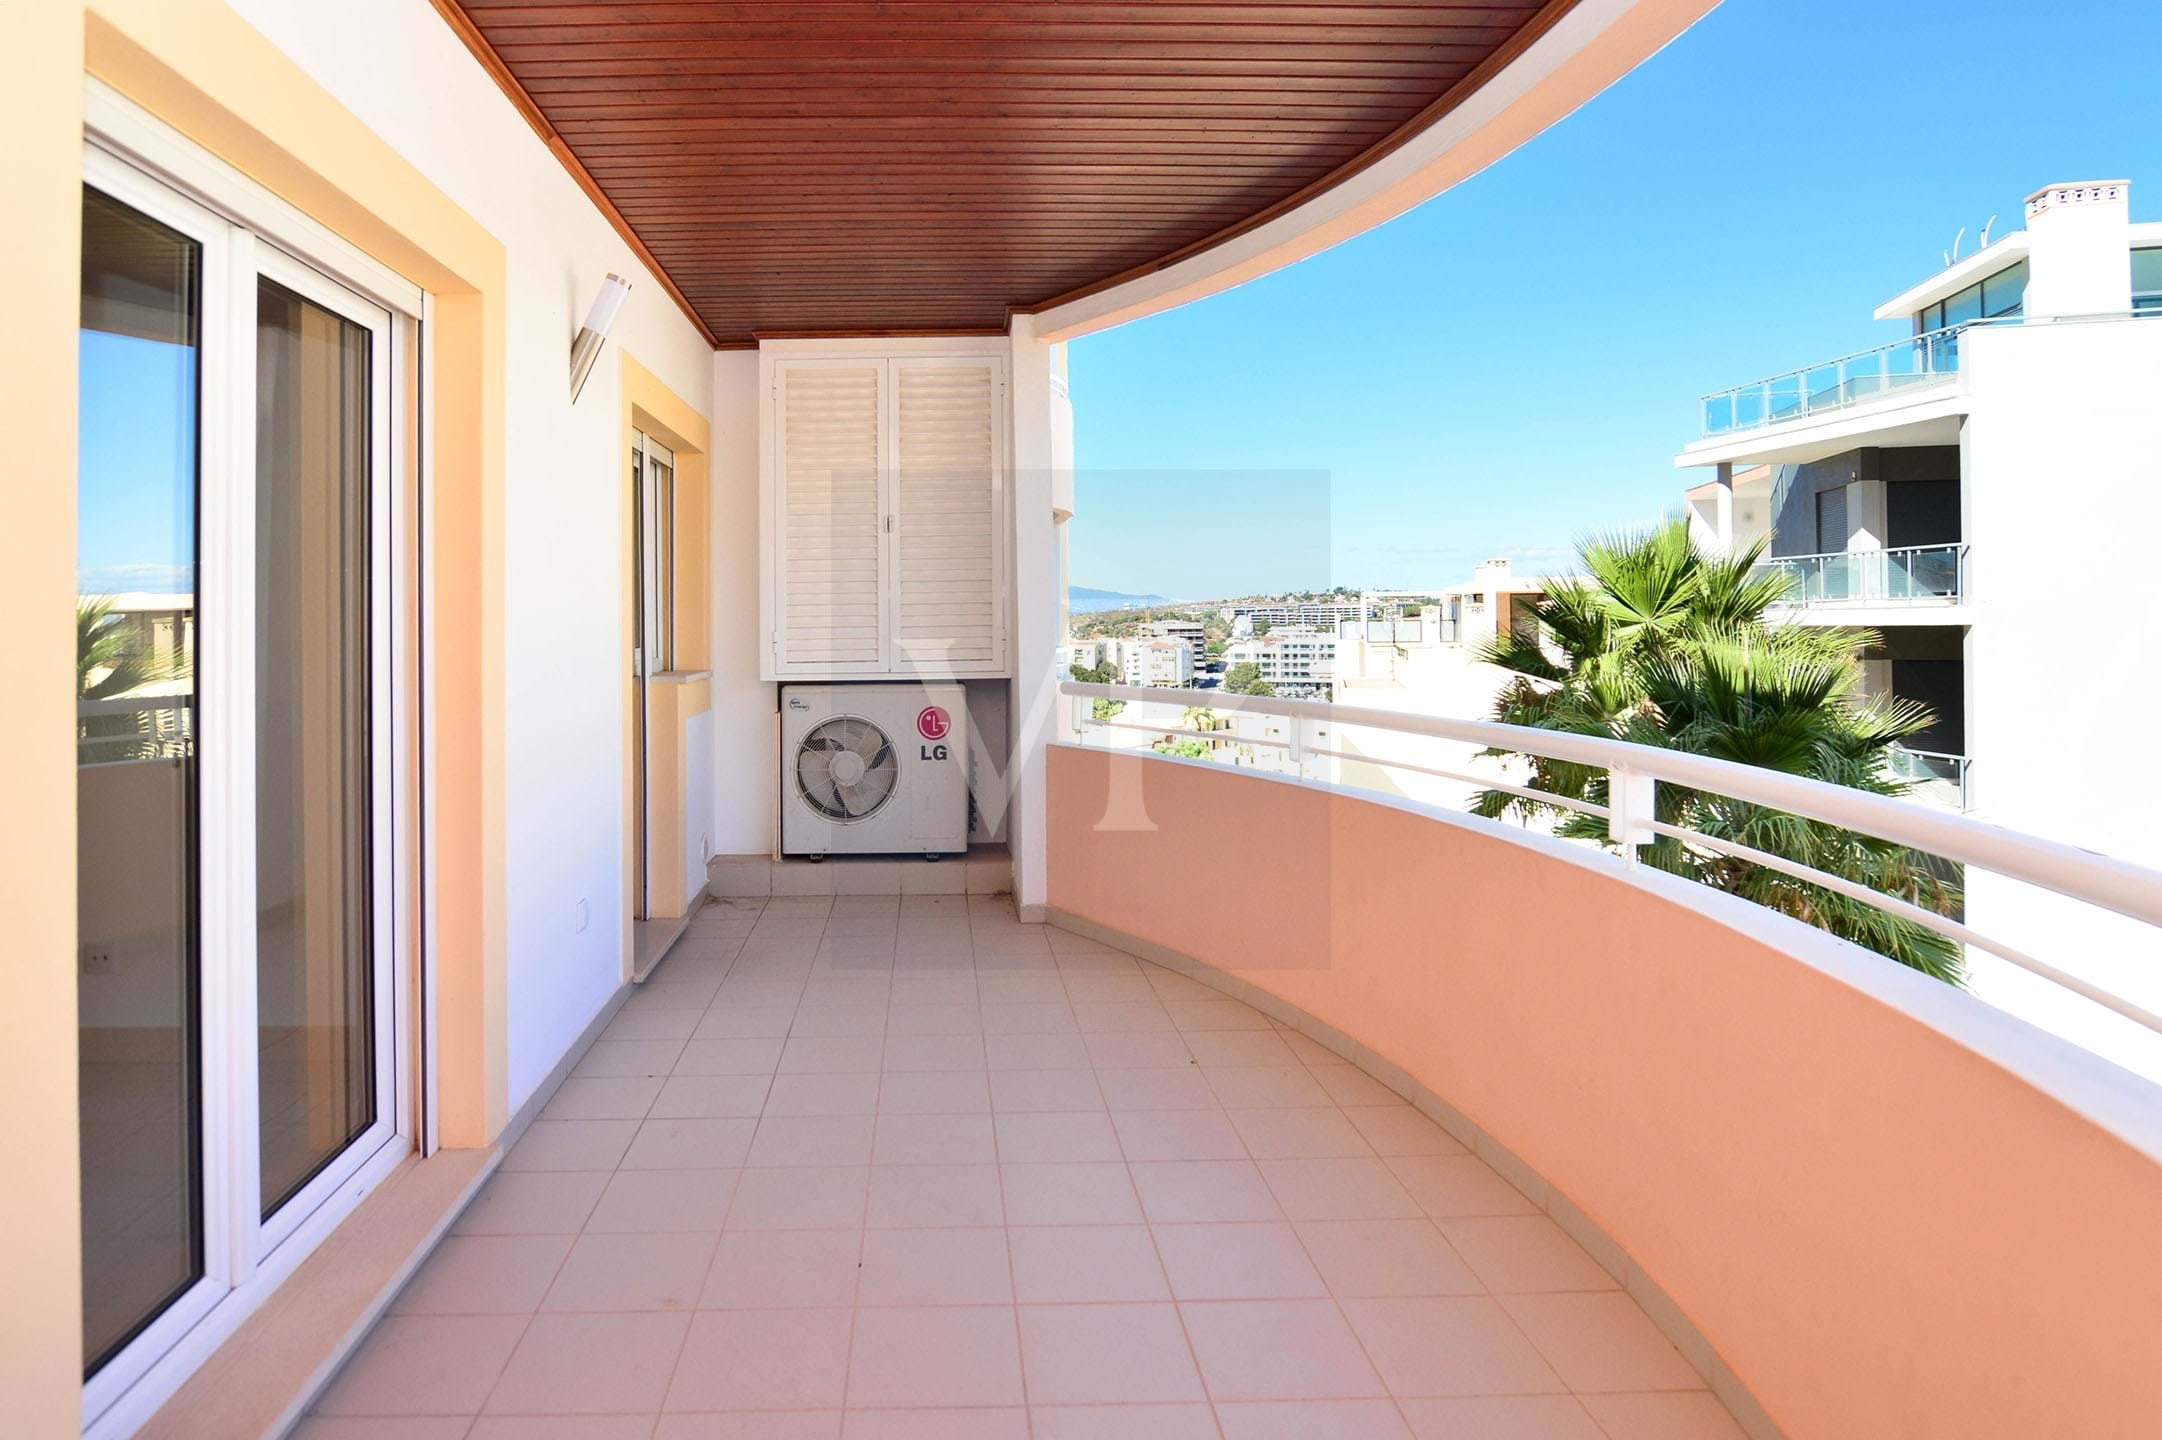 Fantastic 3 bedroom apartment, with two parking spaces and storage